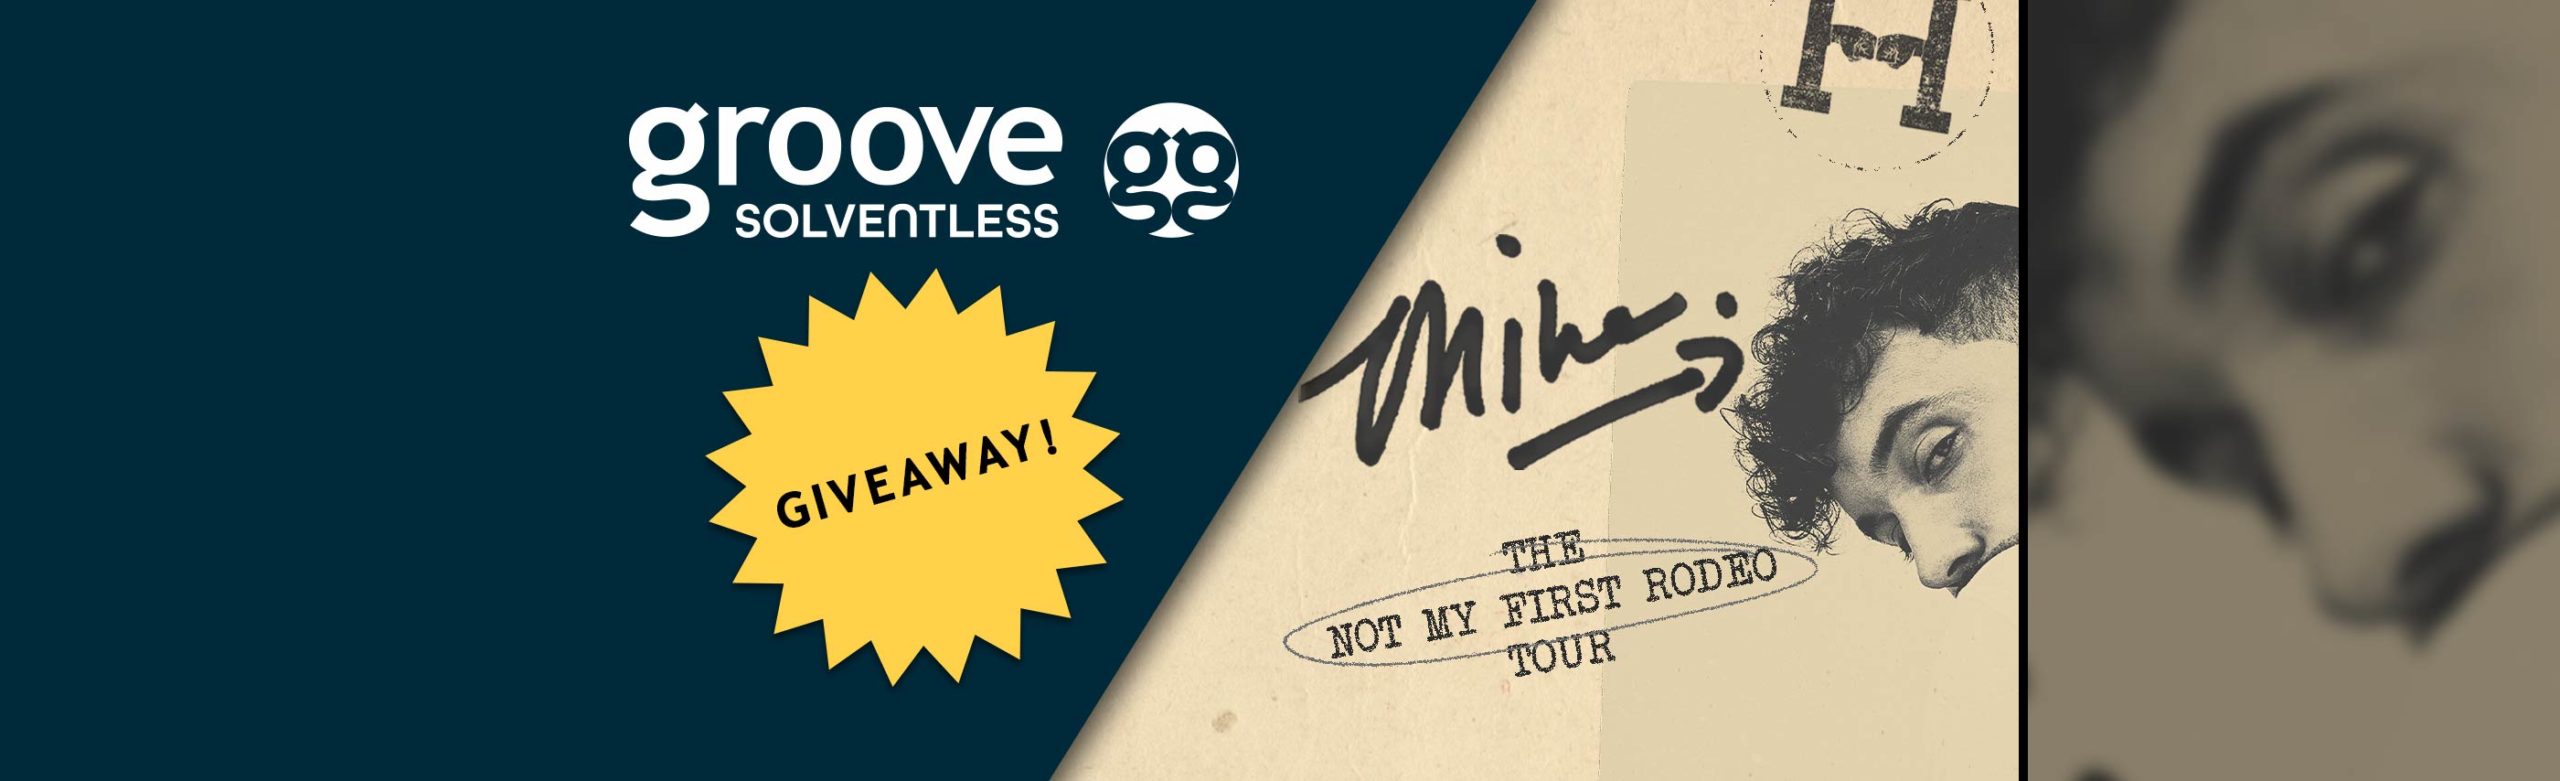 Win Tickets to Mike. in Montana Image